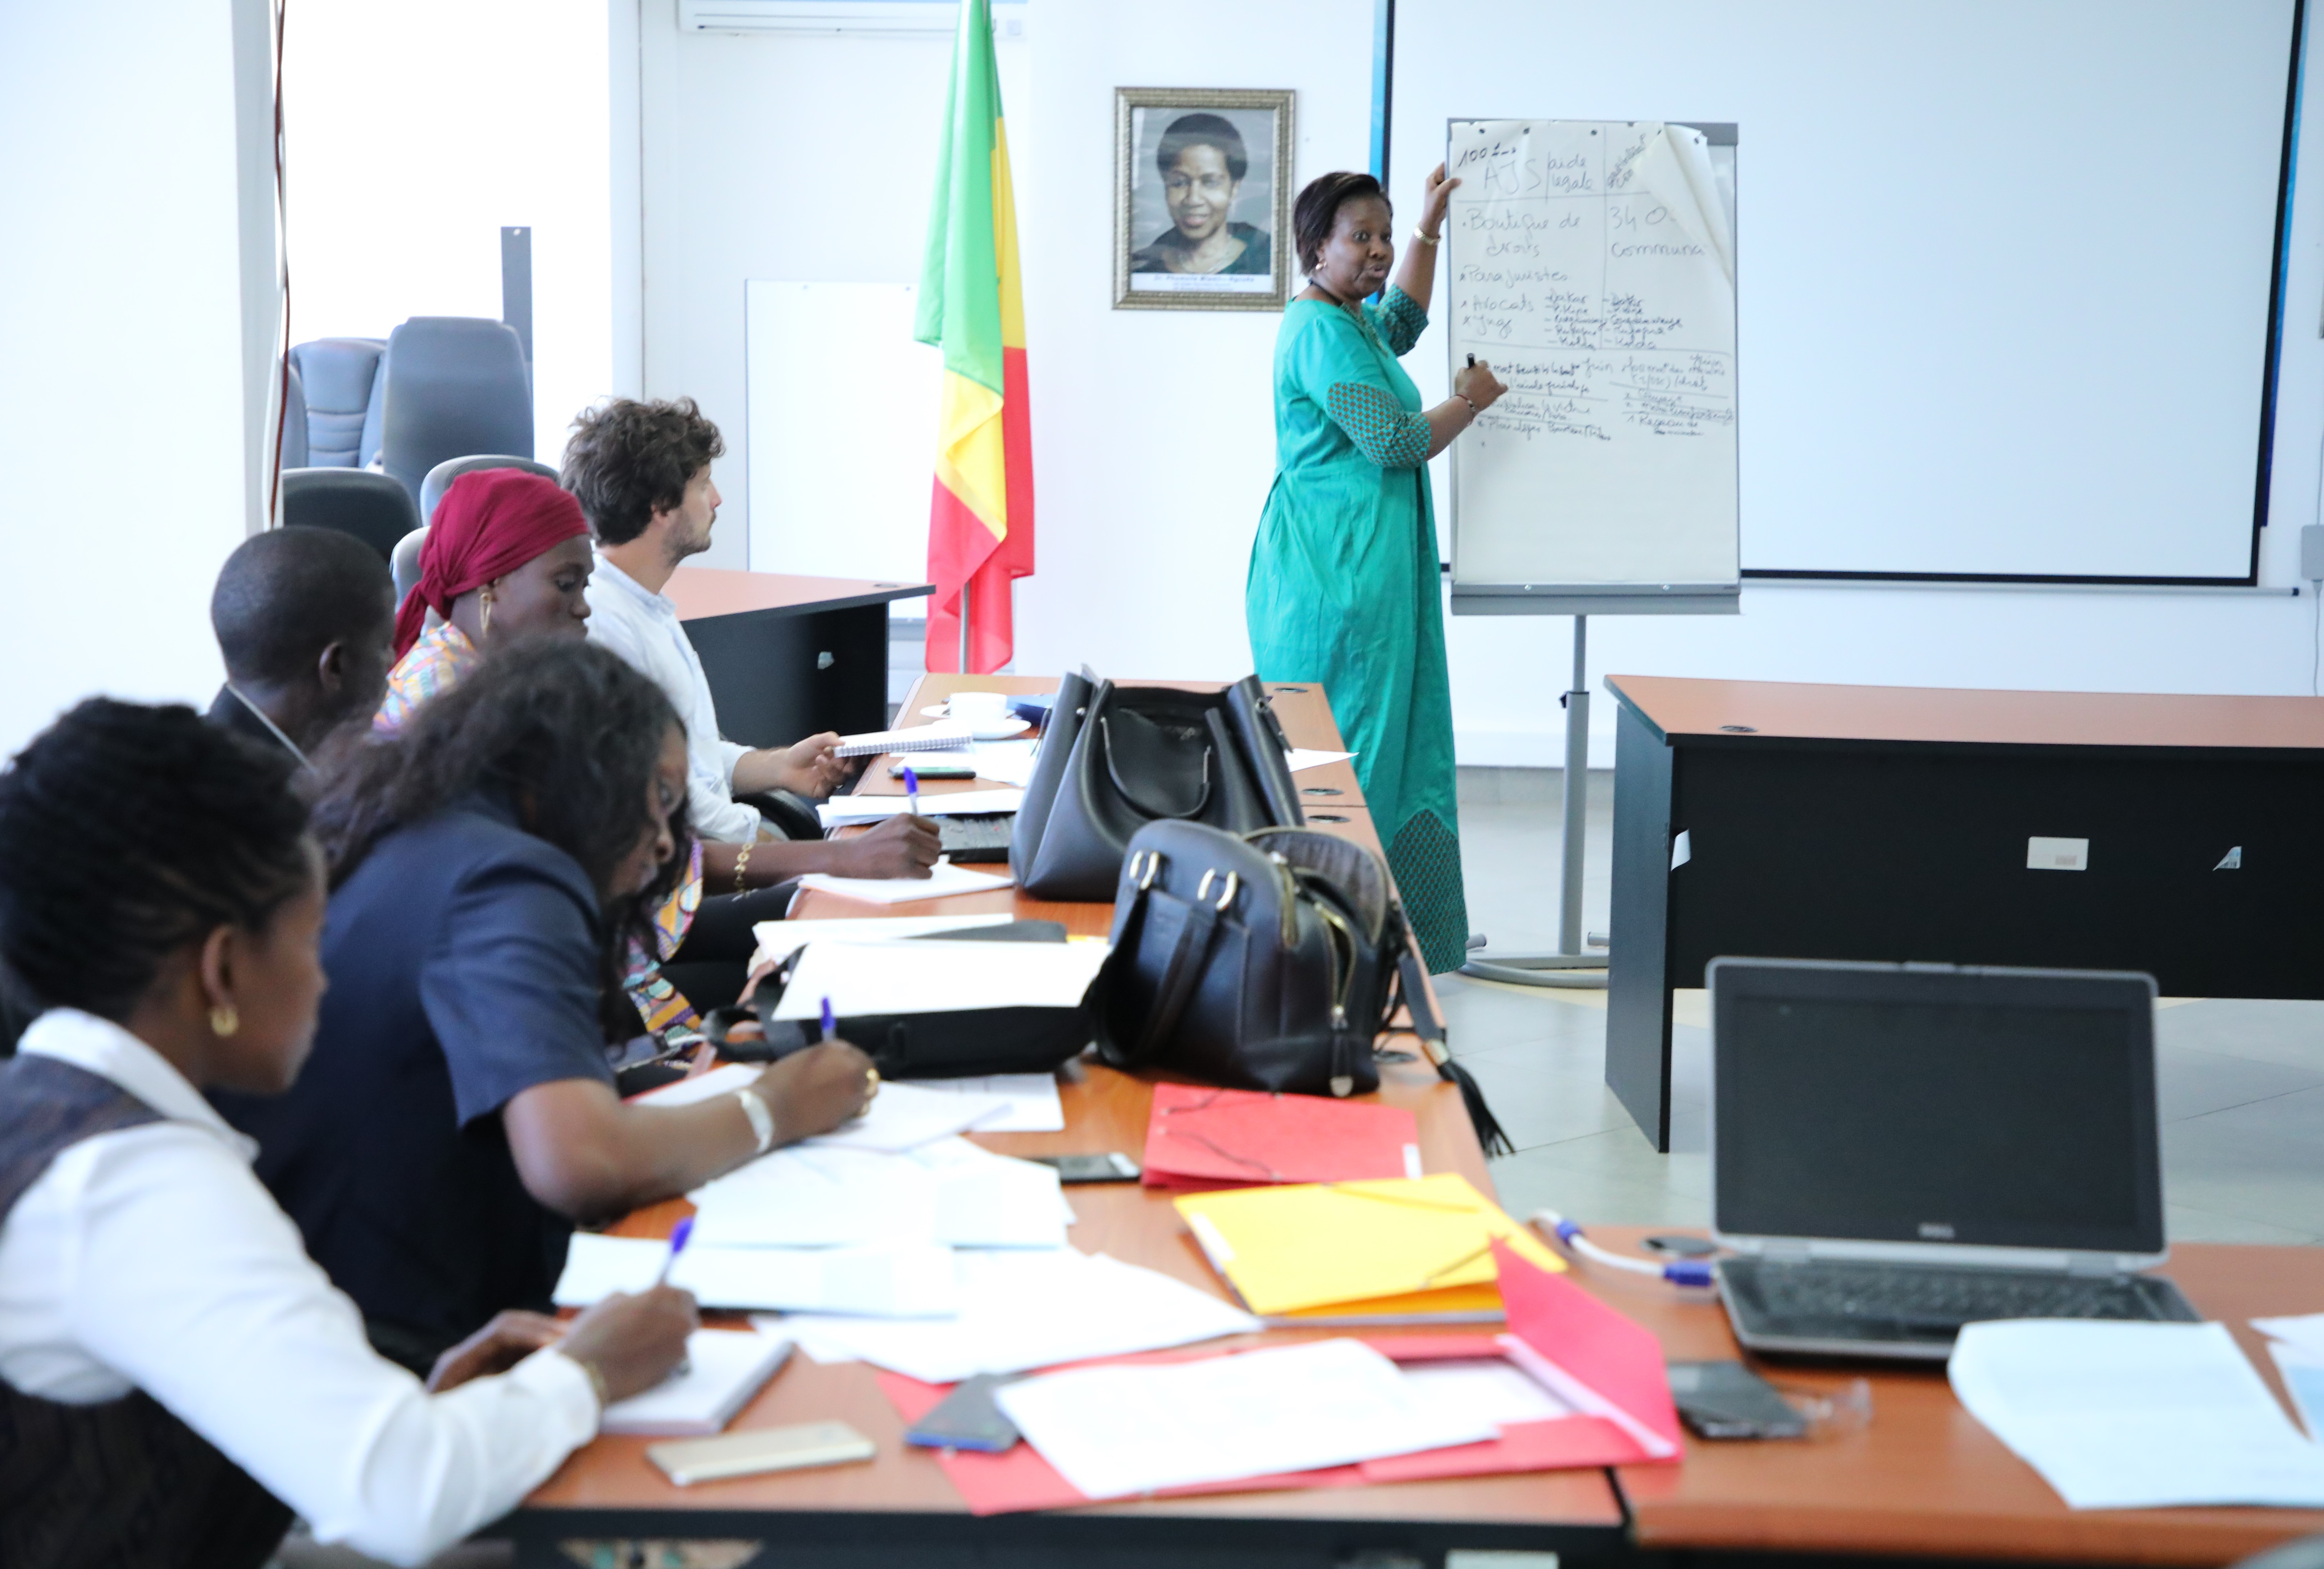 Marie Sabara, EVAW Program Officer presents the "Improving access to legal aid for women" project in front of representatives from sister UN agencies, civil society and Government.